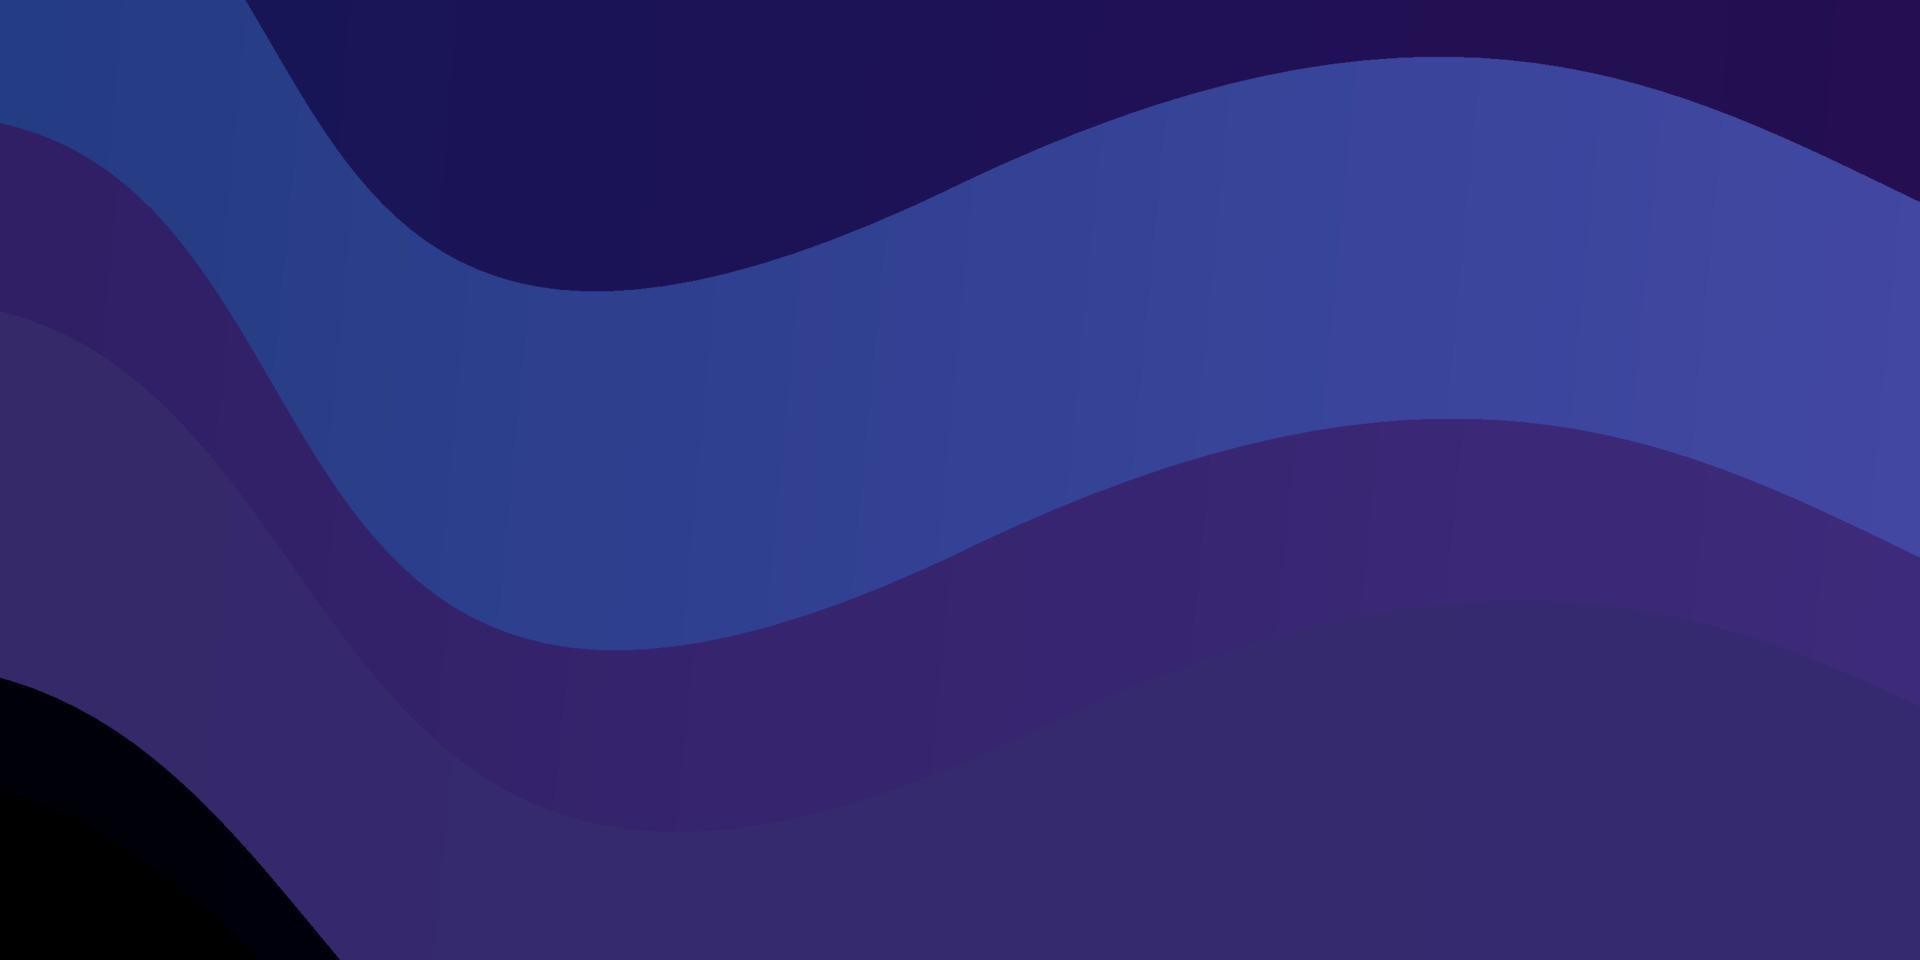 Dark Purple vector layout with curves.